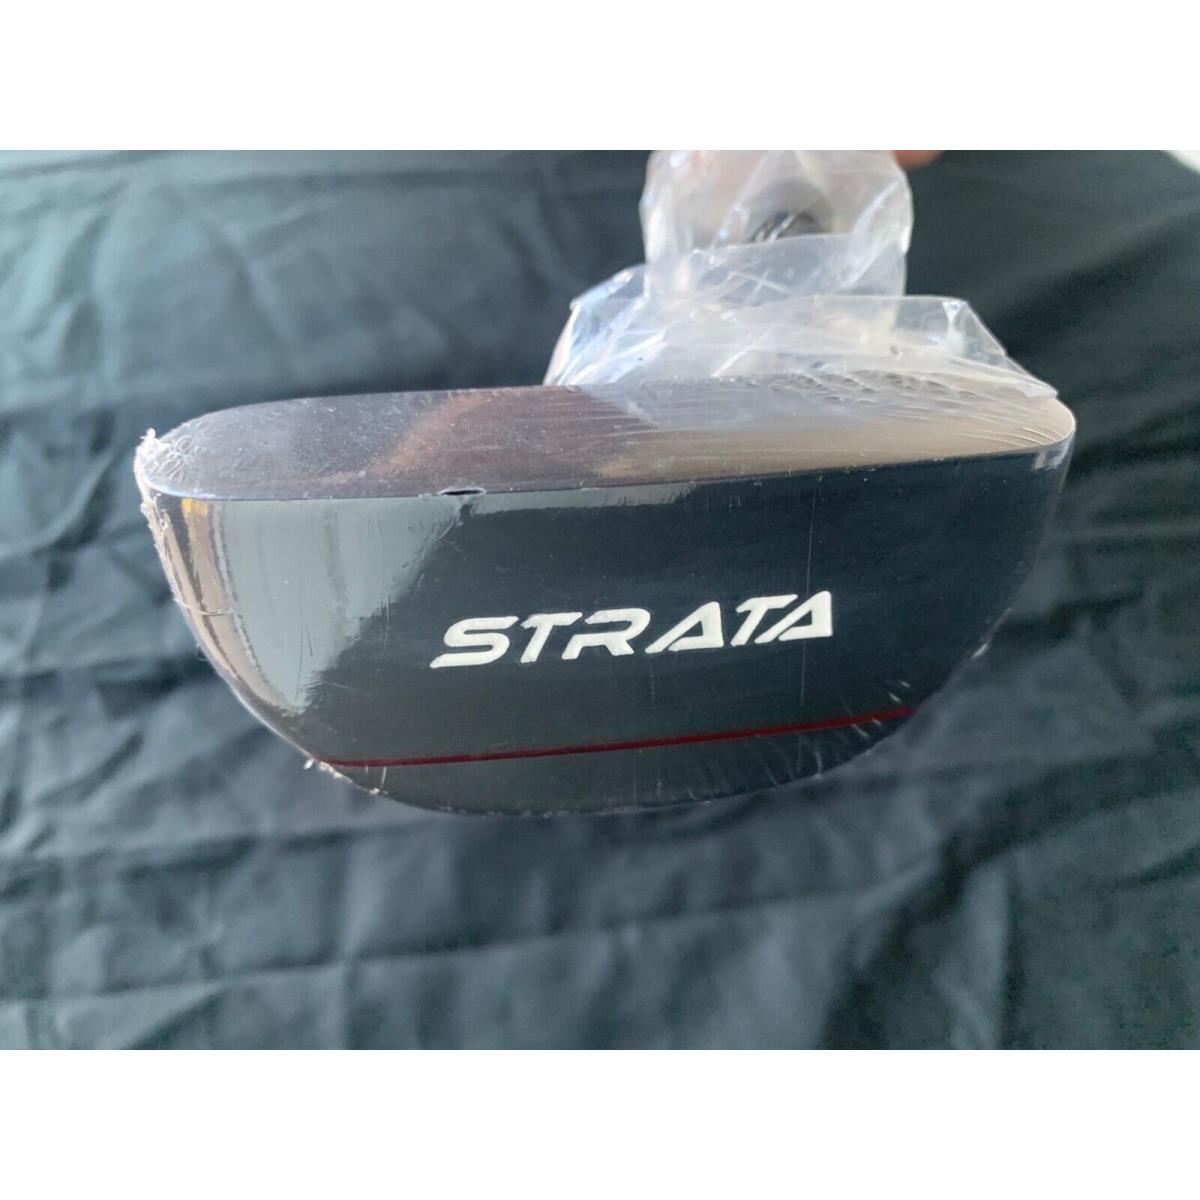 Black Strata Mallet Putter BY Callaway Putter Golf Club 35 Right H